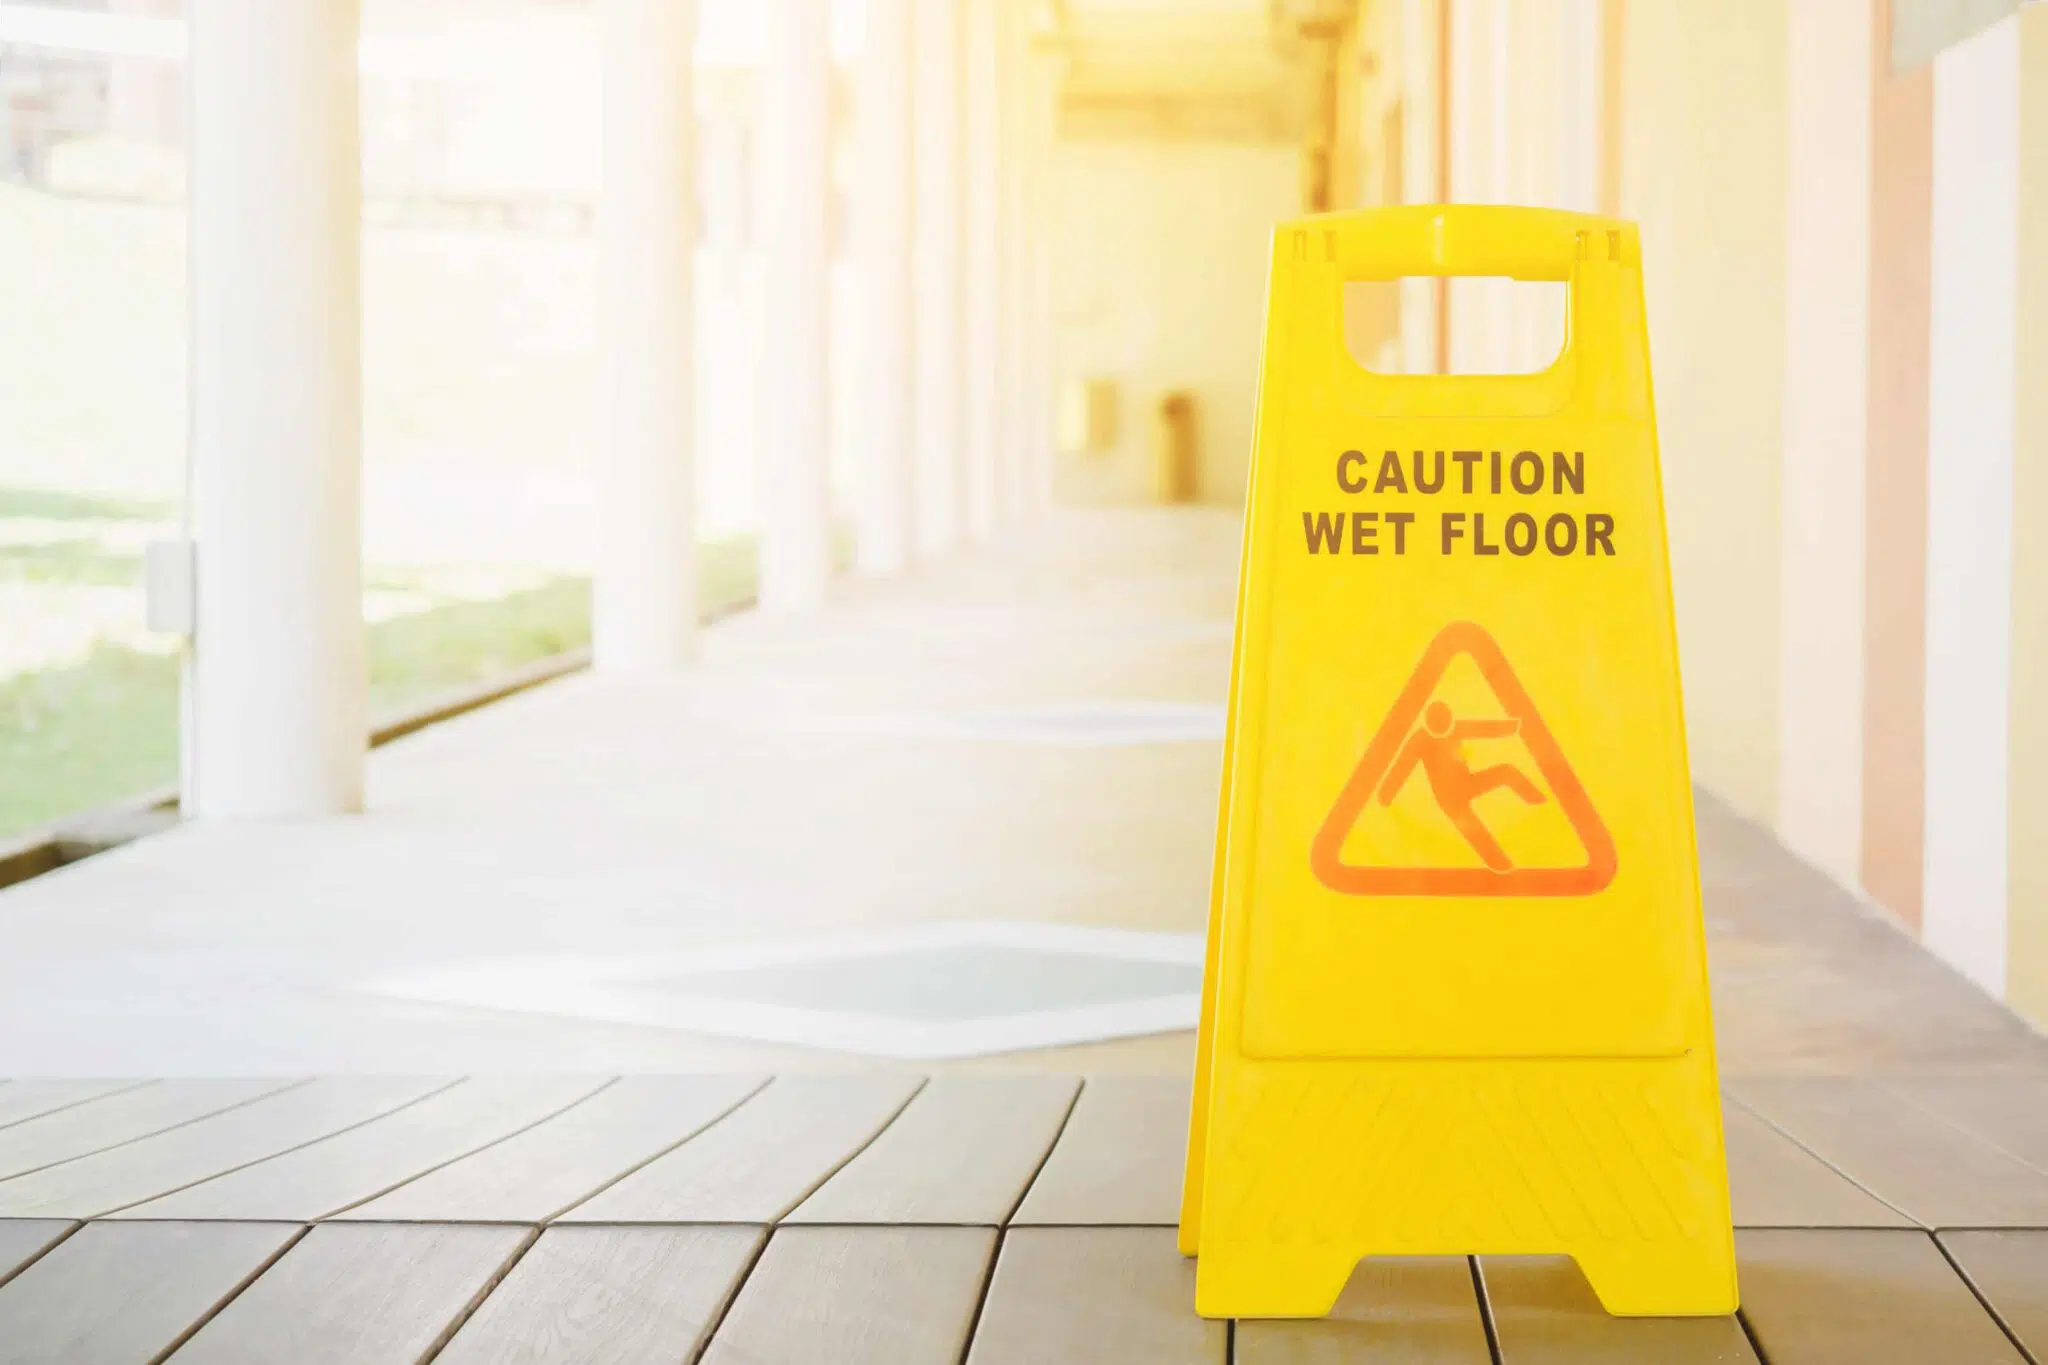 Caution Wet Floor sign on porch setting with bright sunny background